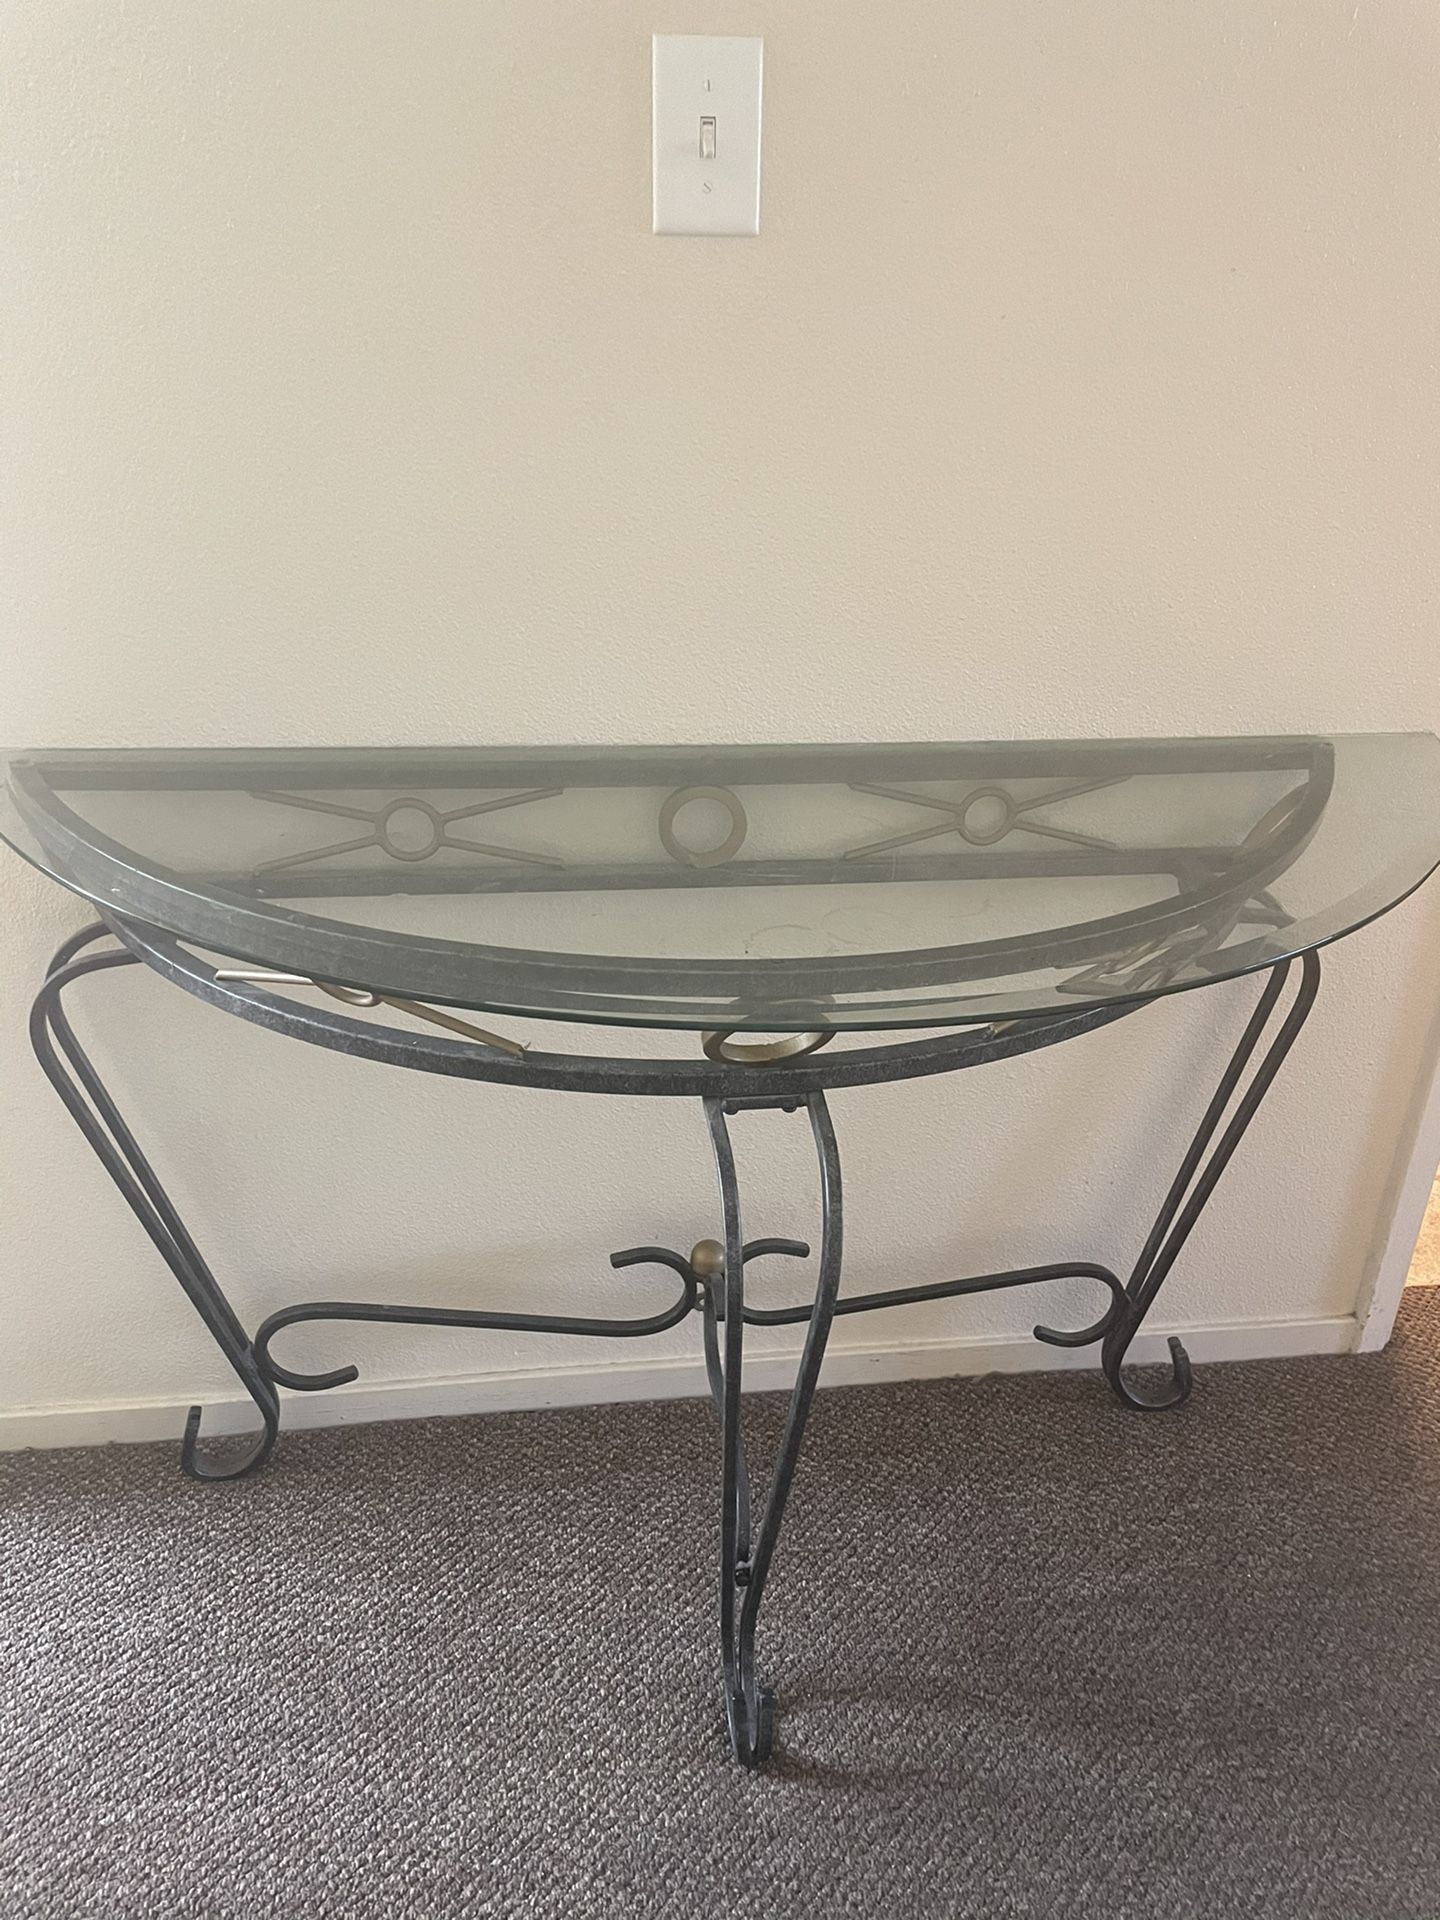 Set of 5 glass tables